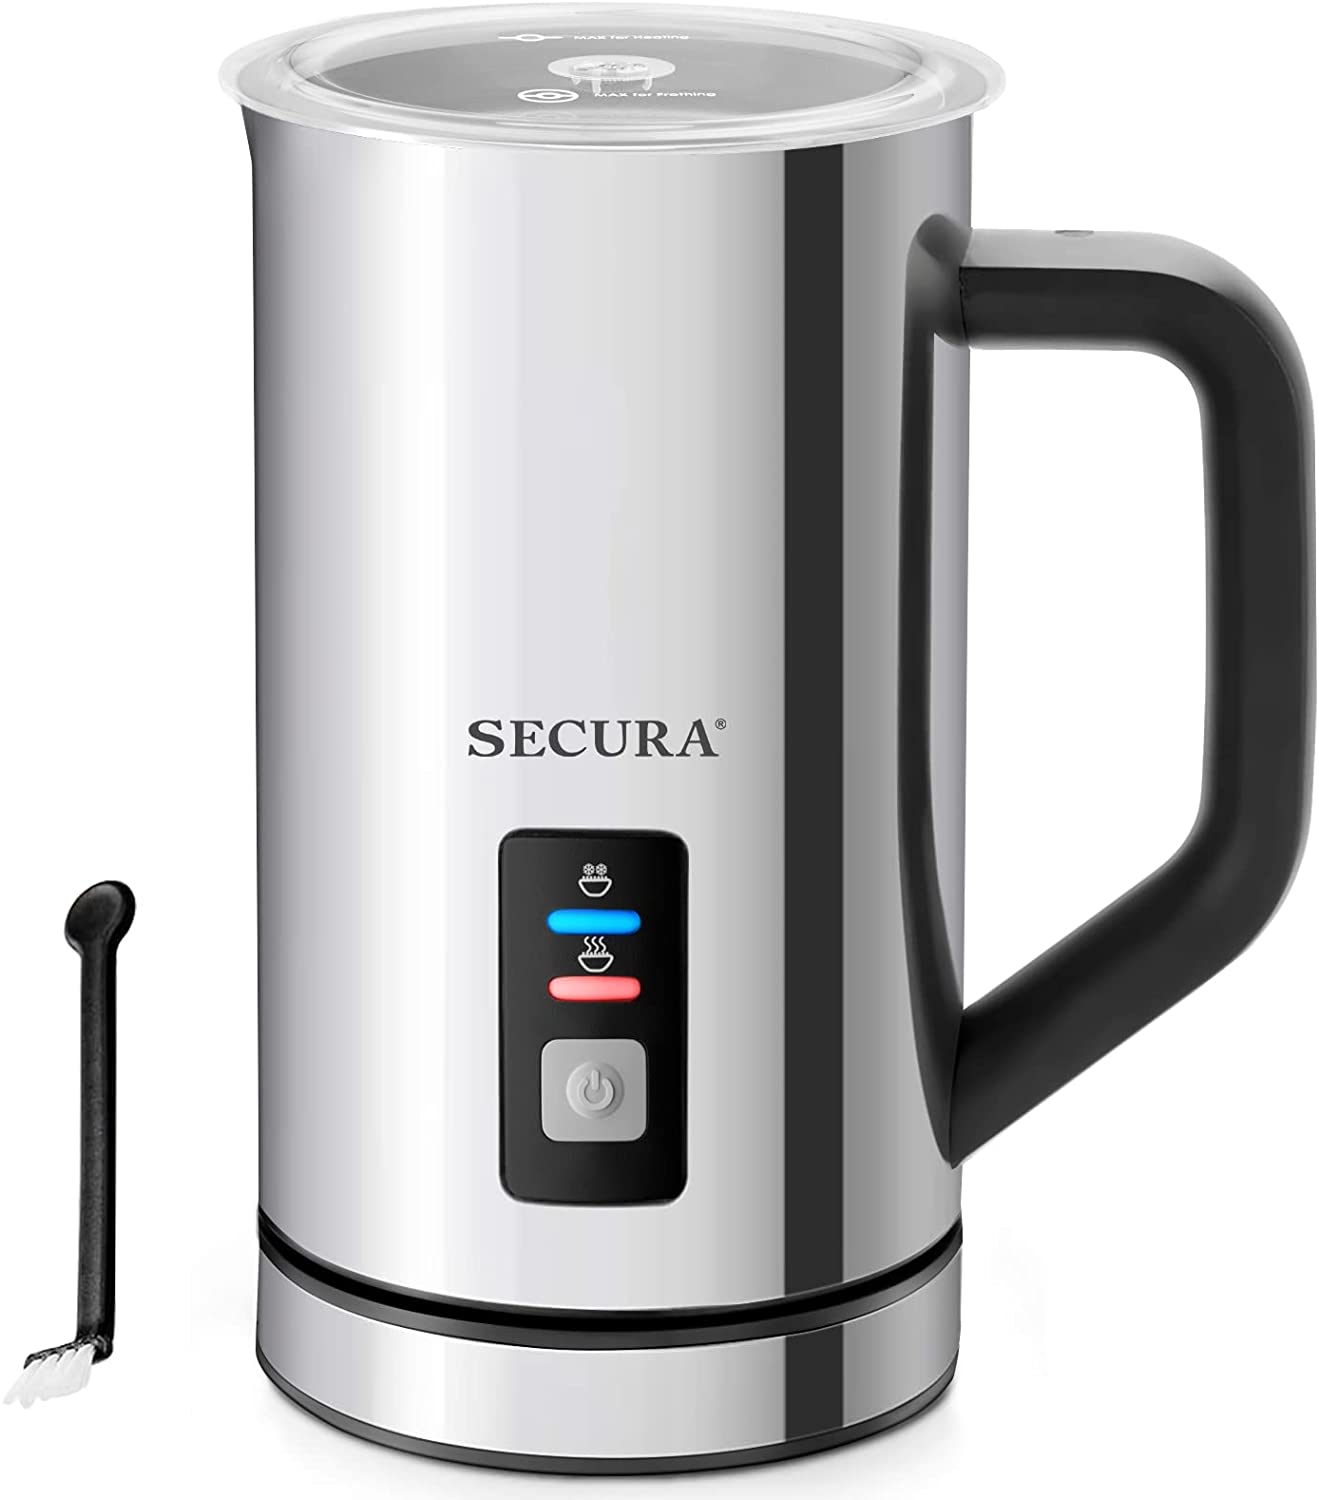 Secura Detachable Base Multifunctional Milk Frother